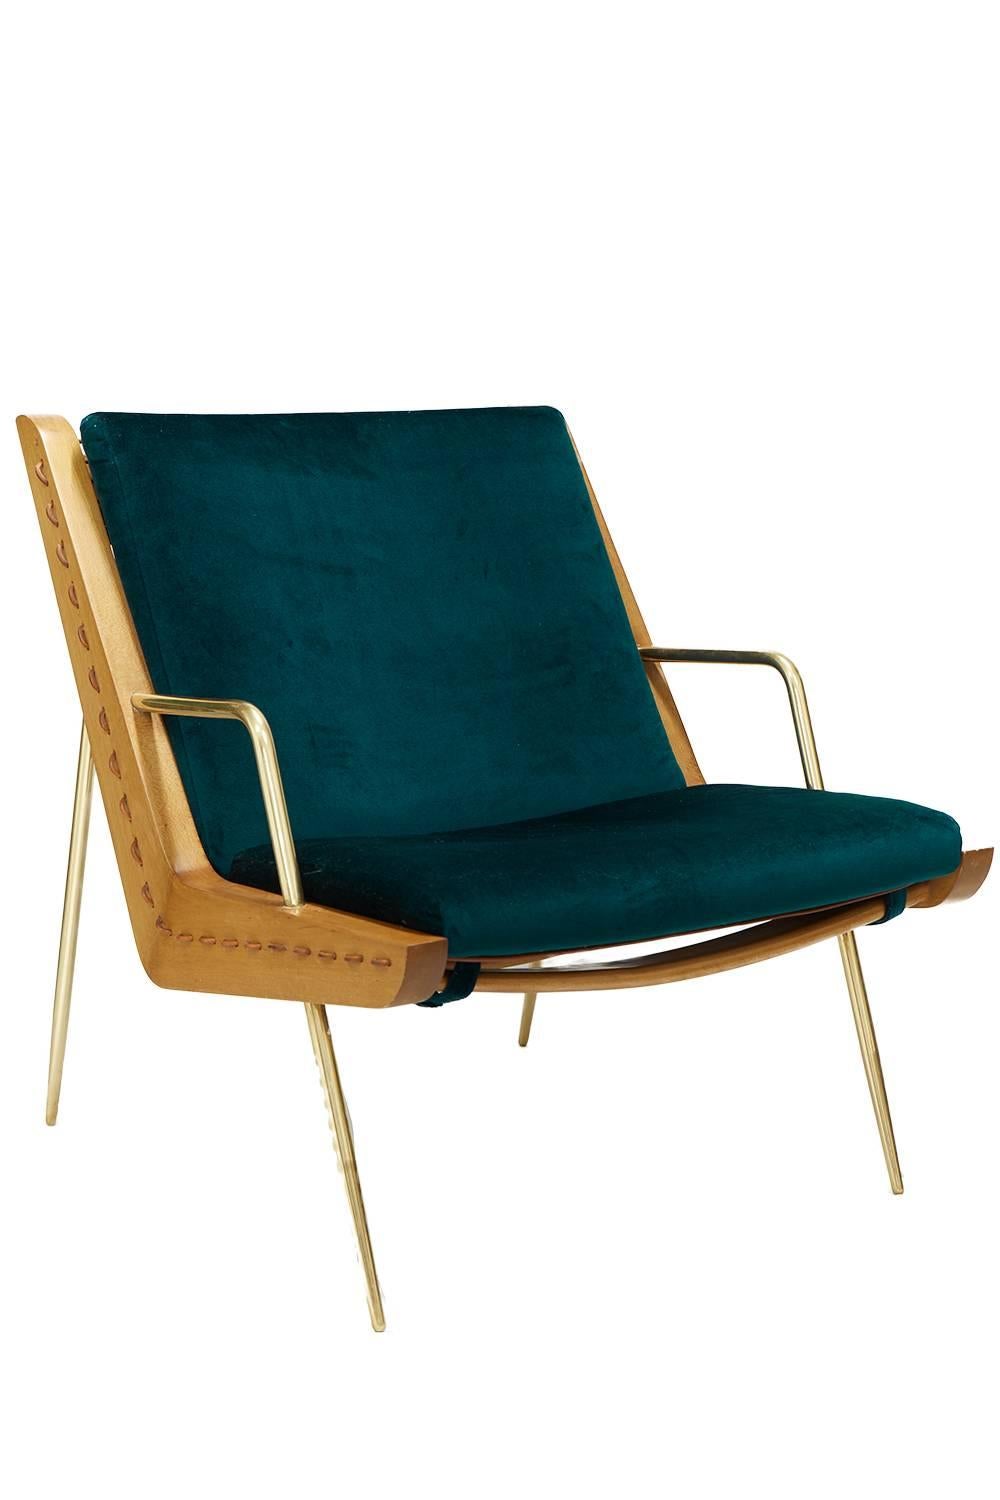 Mid-Century Modern Midcentury Inspired Walt Lounge Chair and Ottoman For Sale